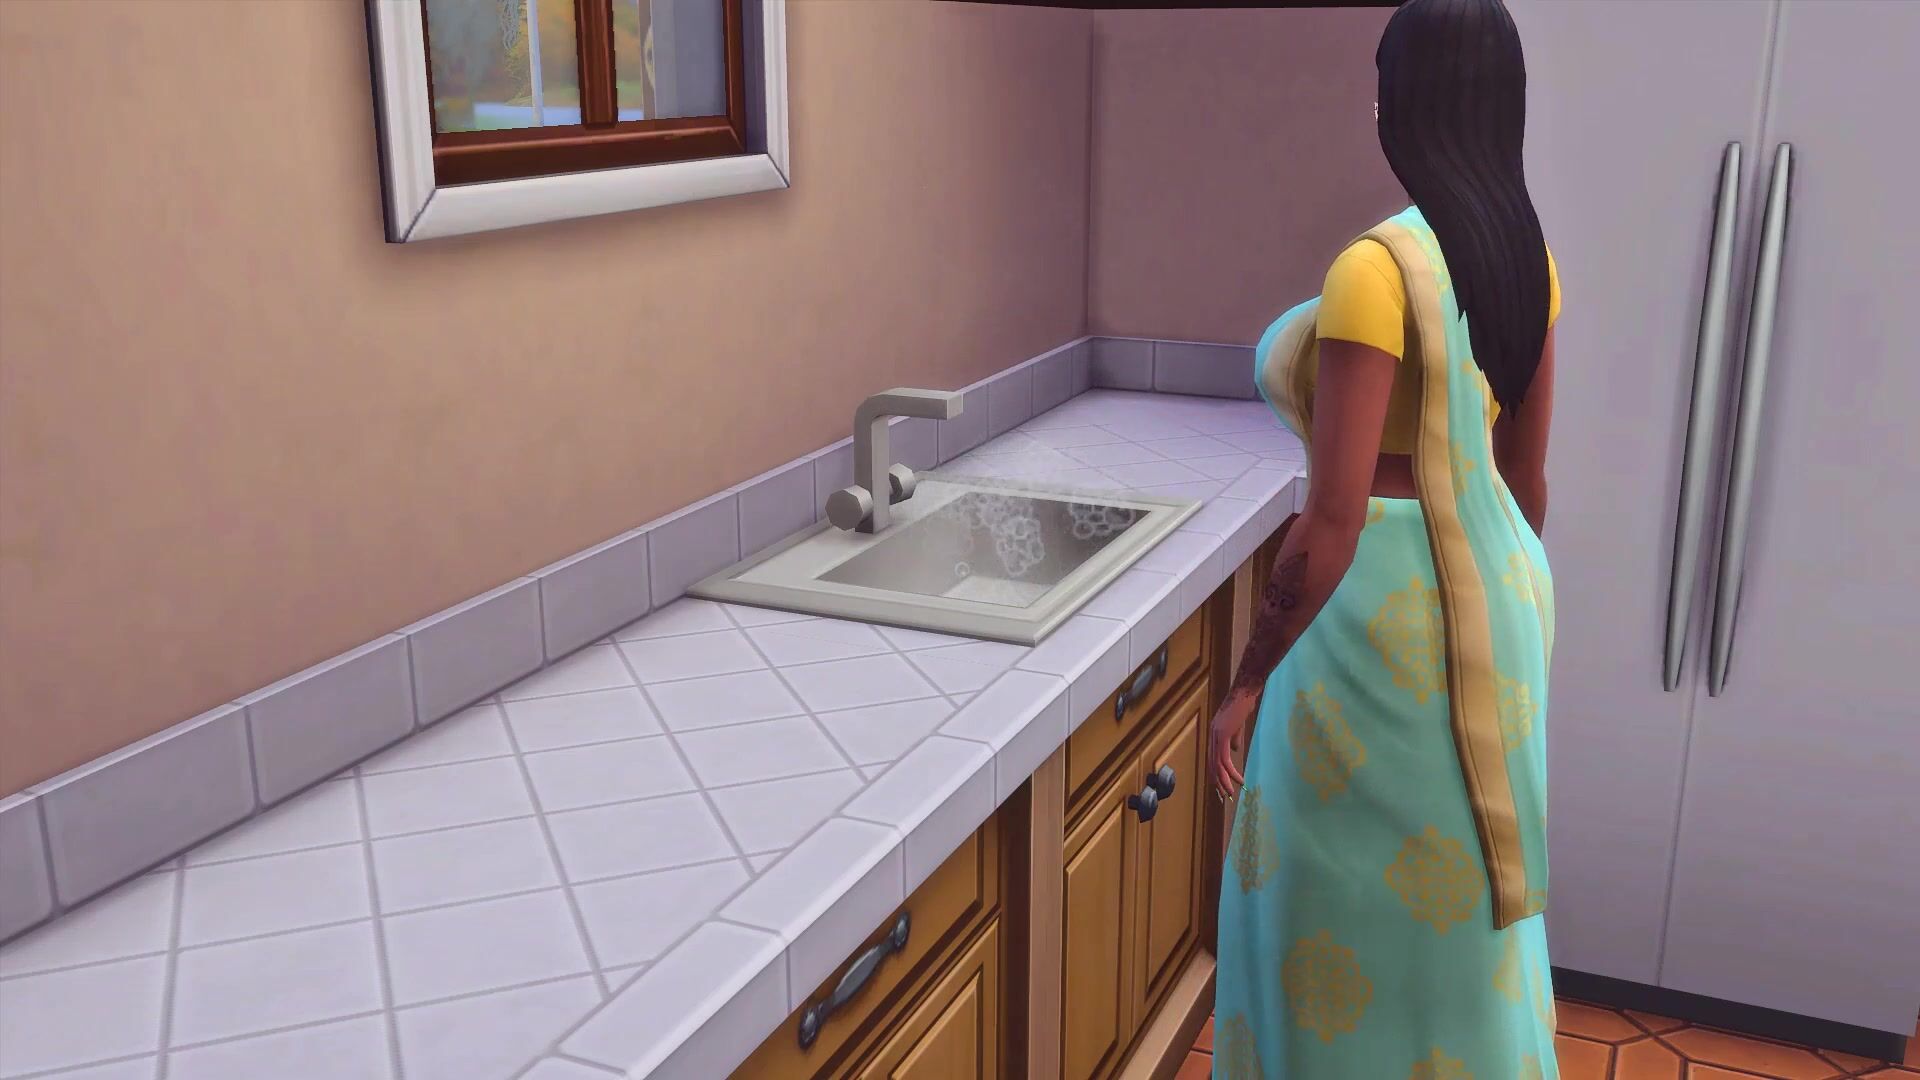 Suhagrat Of Mum And Dad - INDIAN MOTHER CATCHES HER INDIAN SON WATCHING PORN AND MASTURBING AND THEN  HELPS HIM FOR THE FIRST TIME TO HAVE SEX | THE SIMS 4 watch online